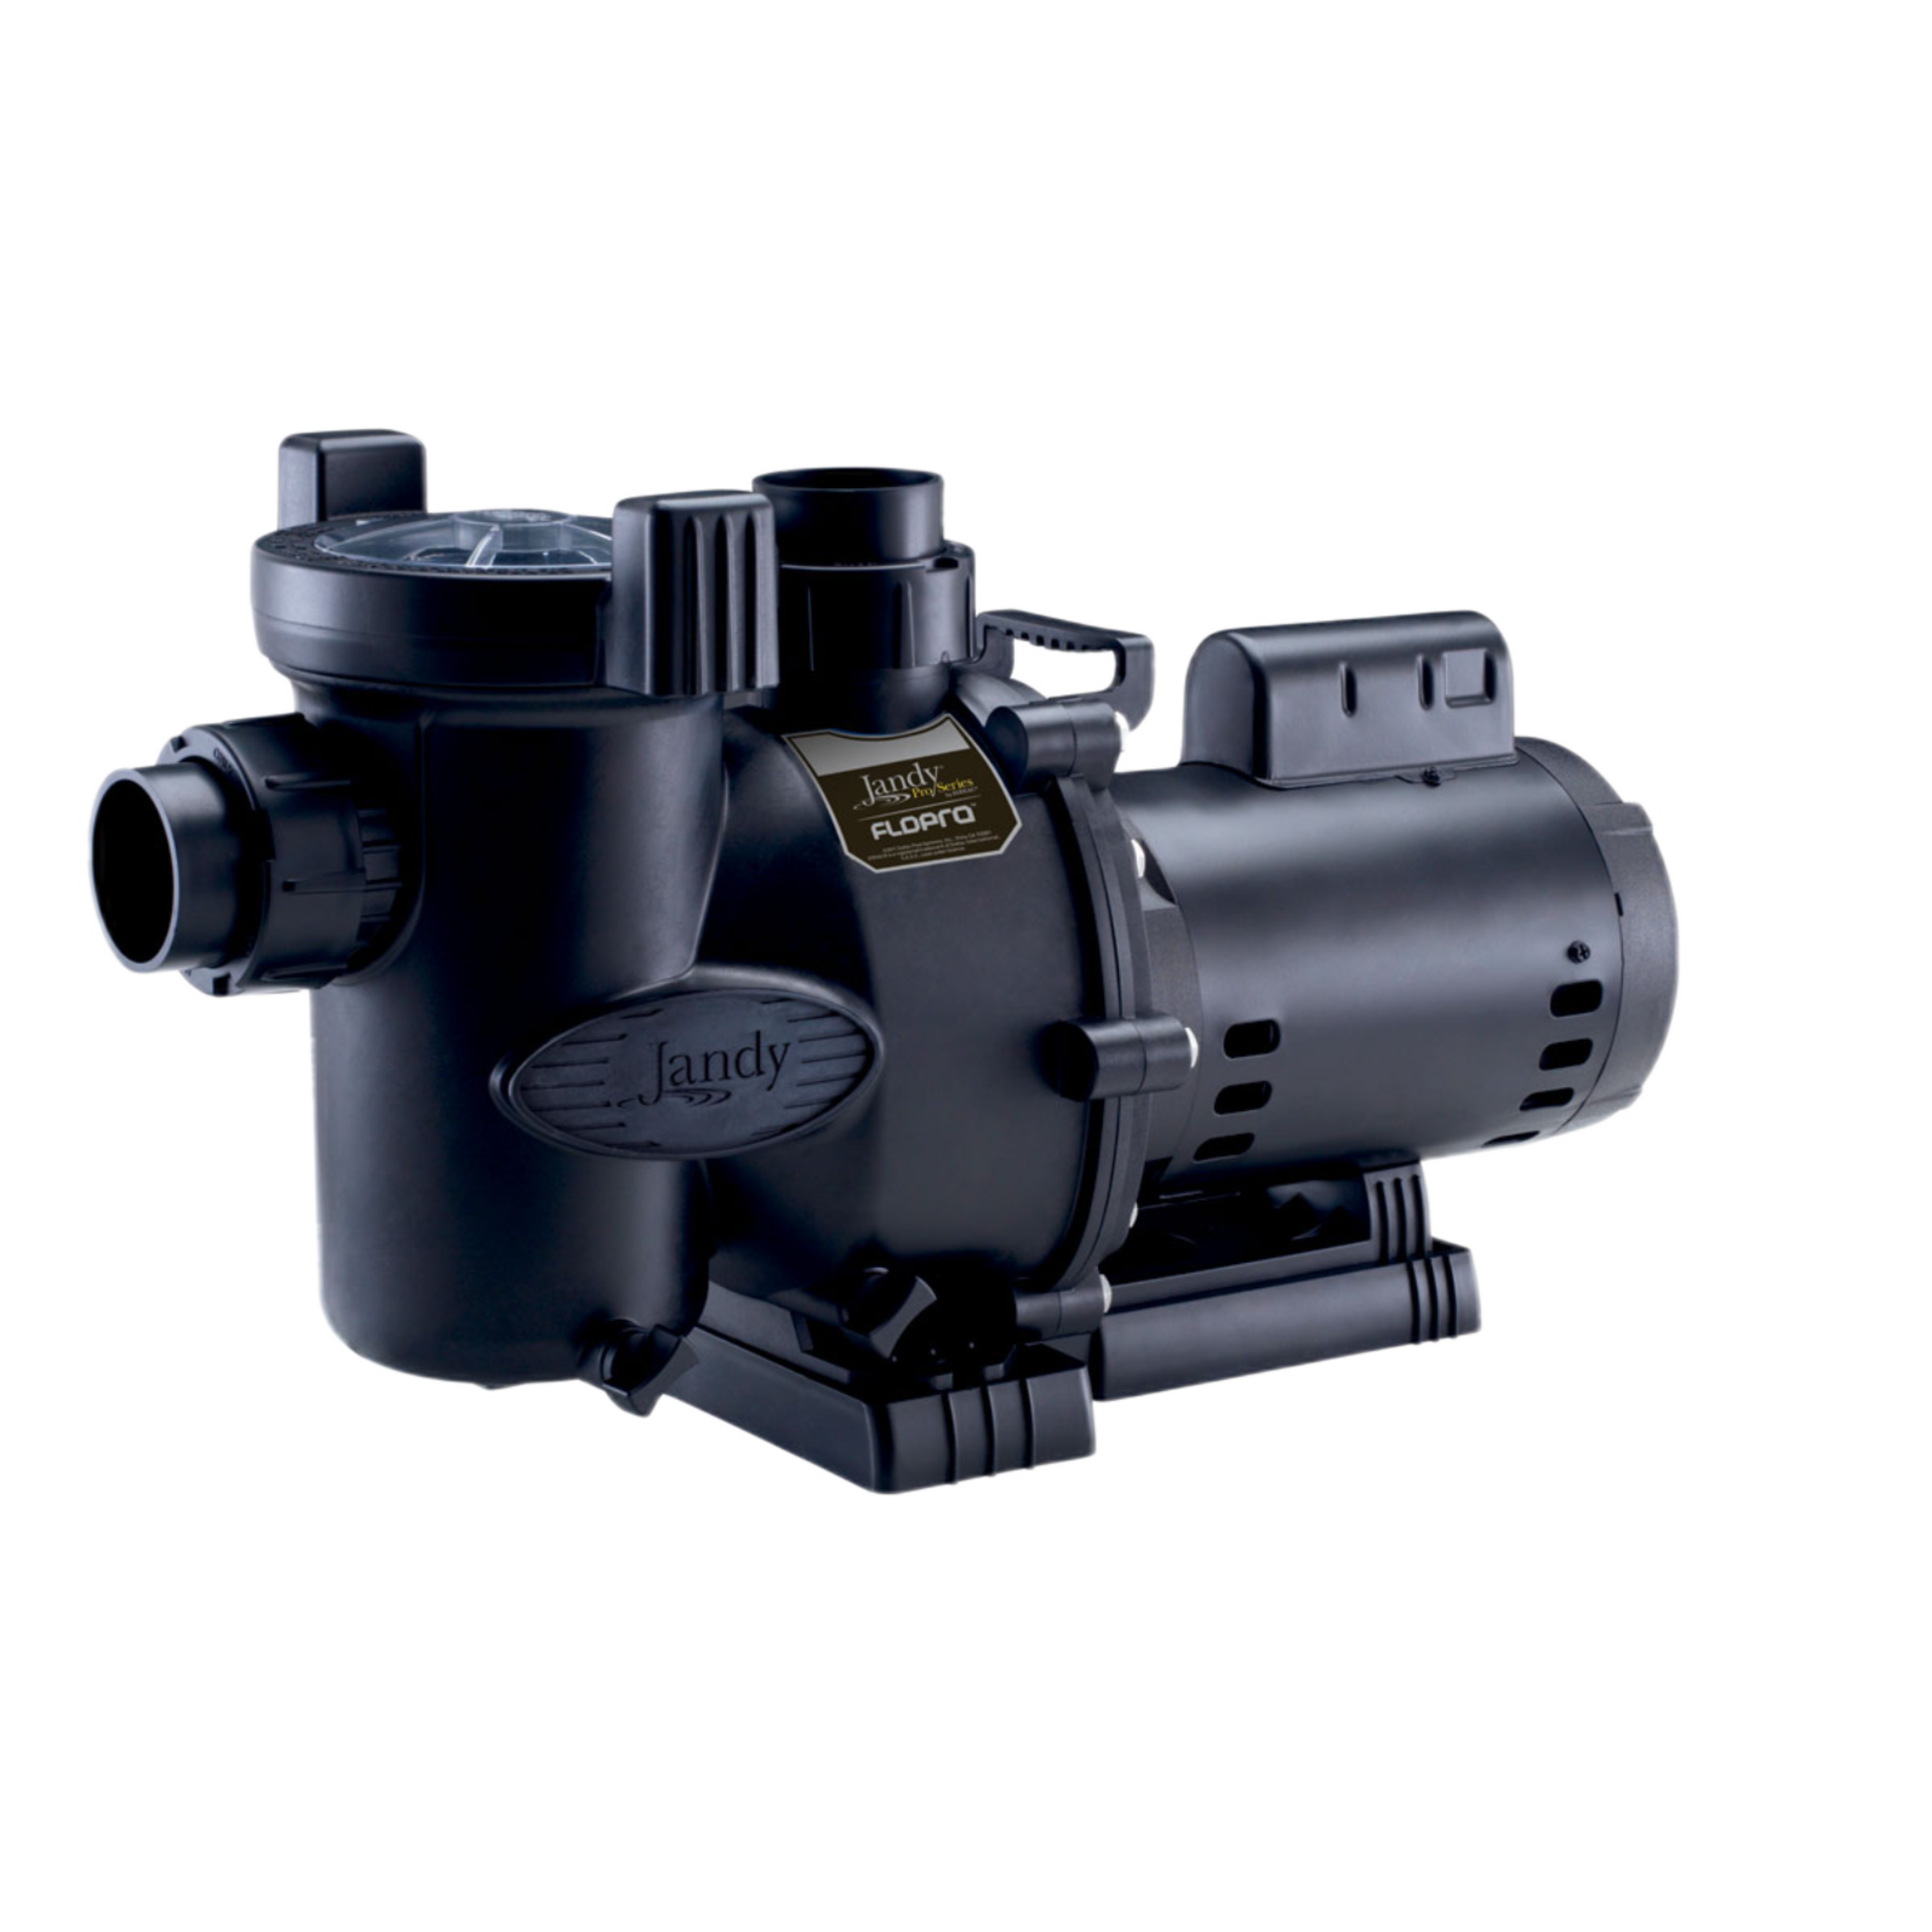 FHPM2.5CND Jandy Inground 2-1/2HP (2.5 HP) FloPro Pump for In-Ground Pools or In-Ground Spas